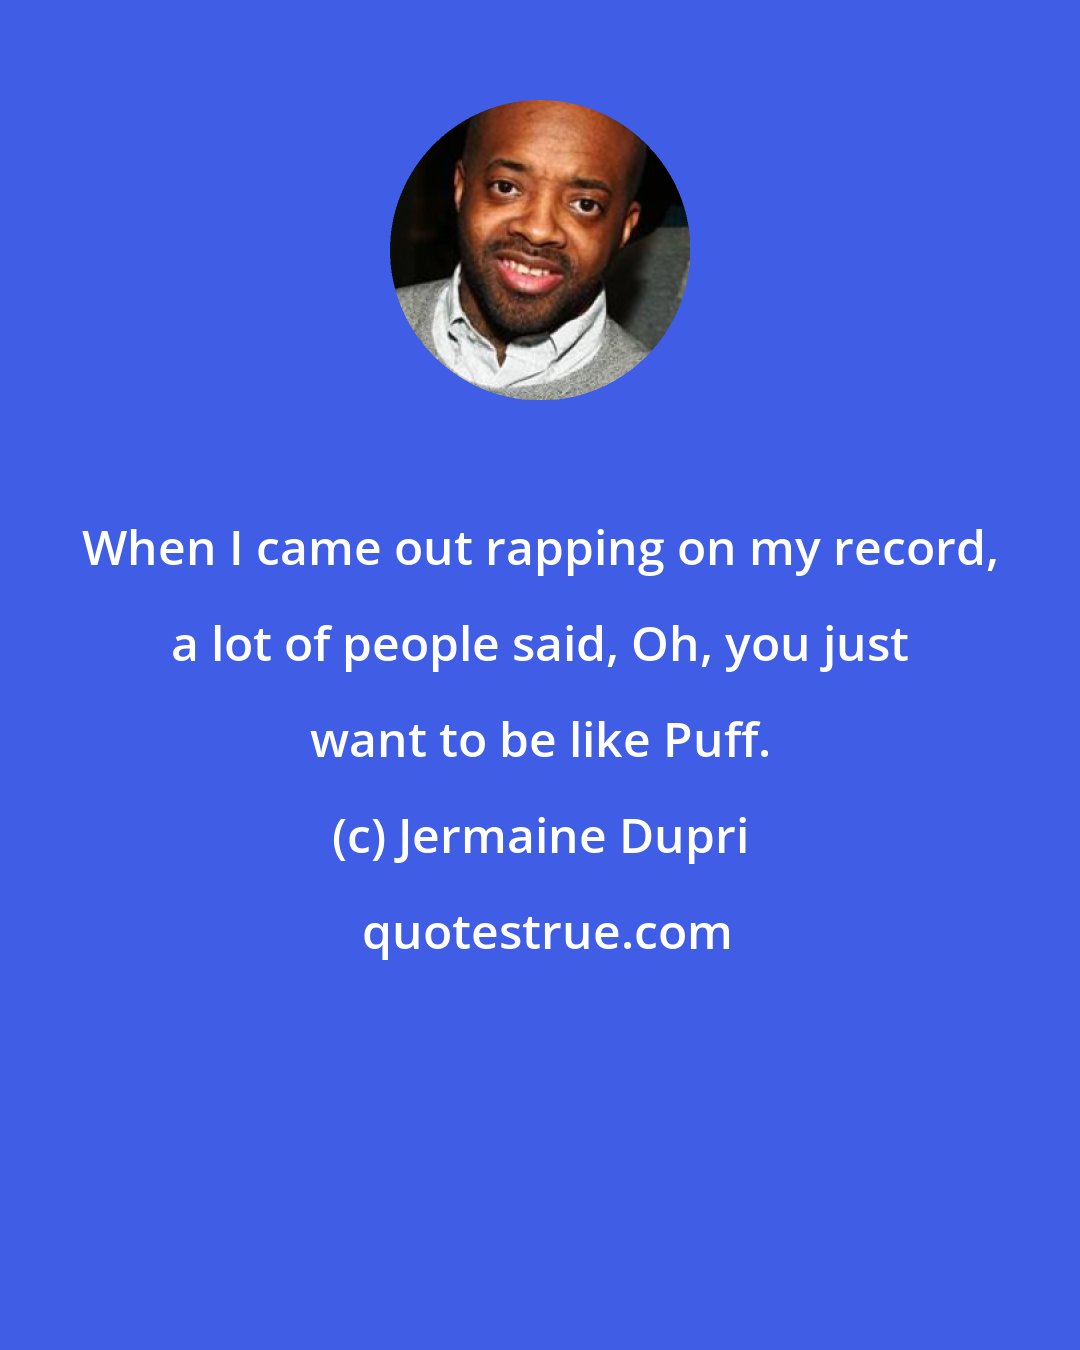 Jermaine Dupri: When I came out rapping on my record, a lot of people said, Oh, you just want to be like Puff.